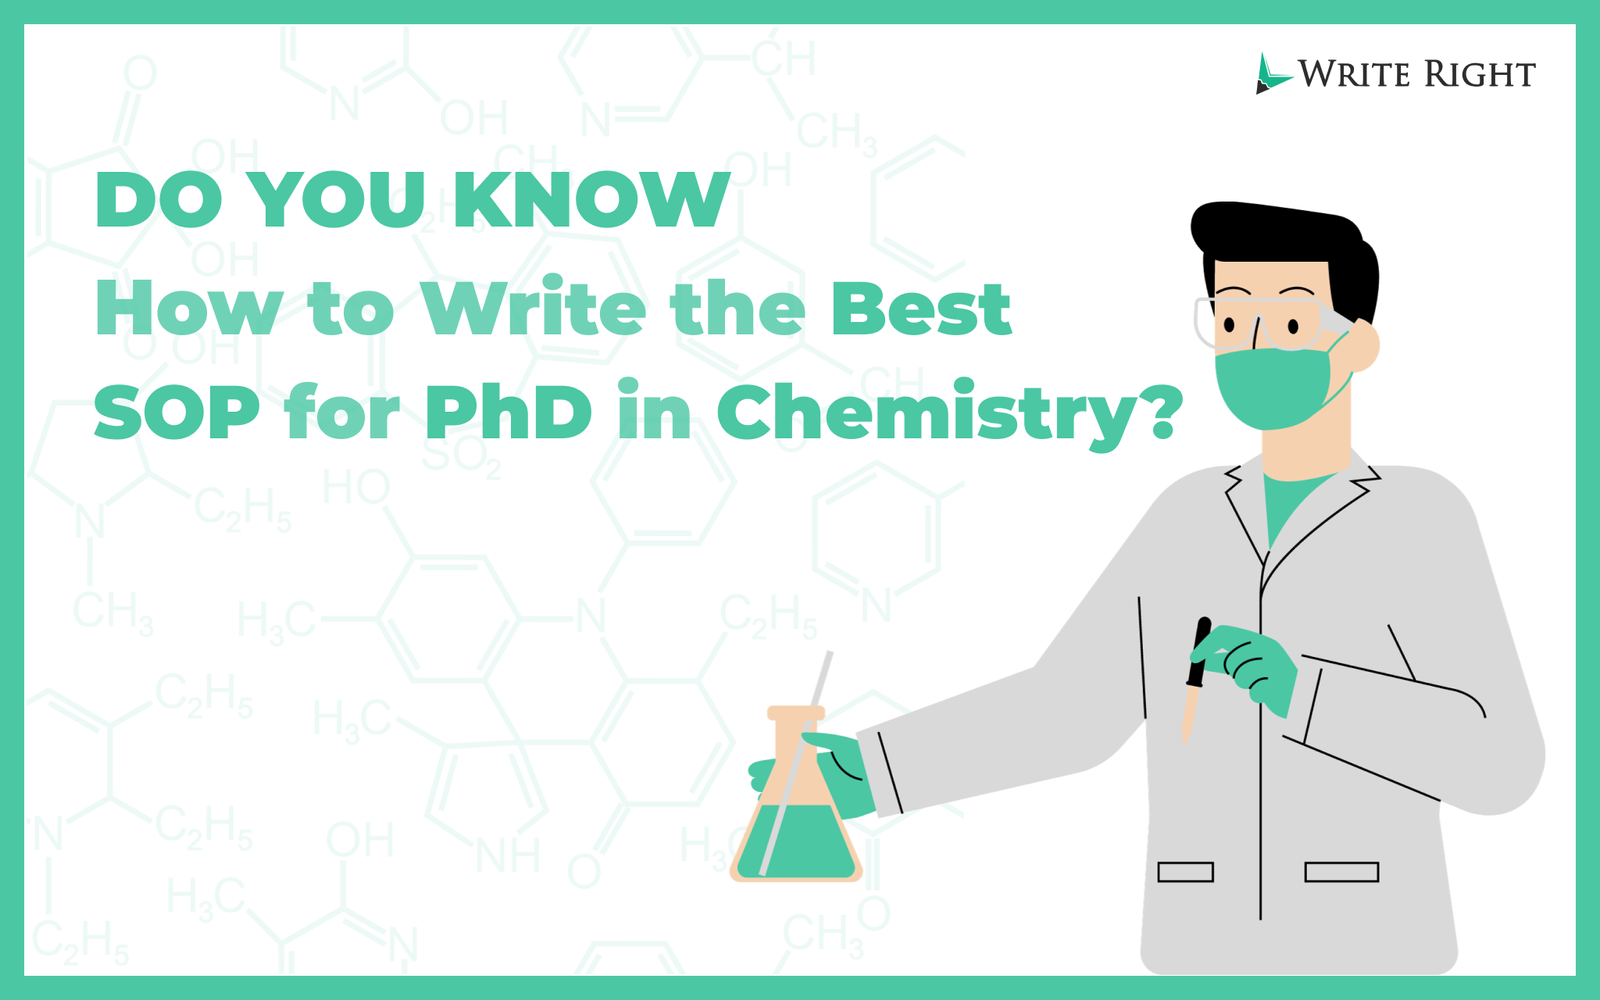 Do You Know How to Write the Best SOP for PhD in Chemistry?